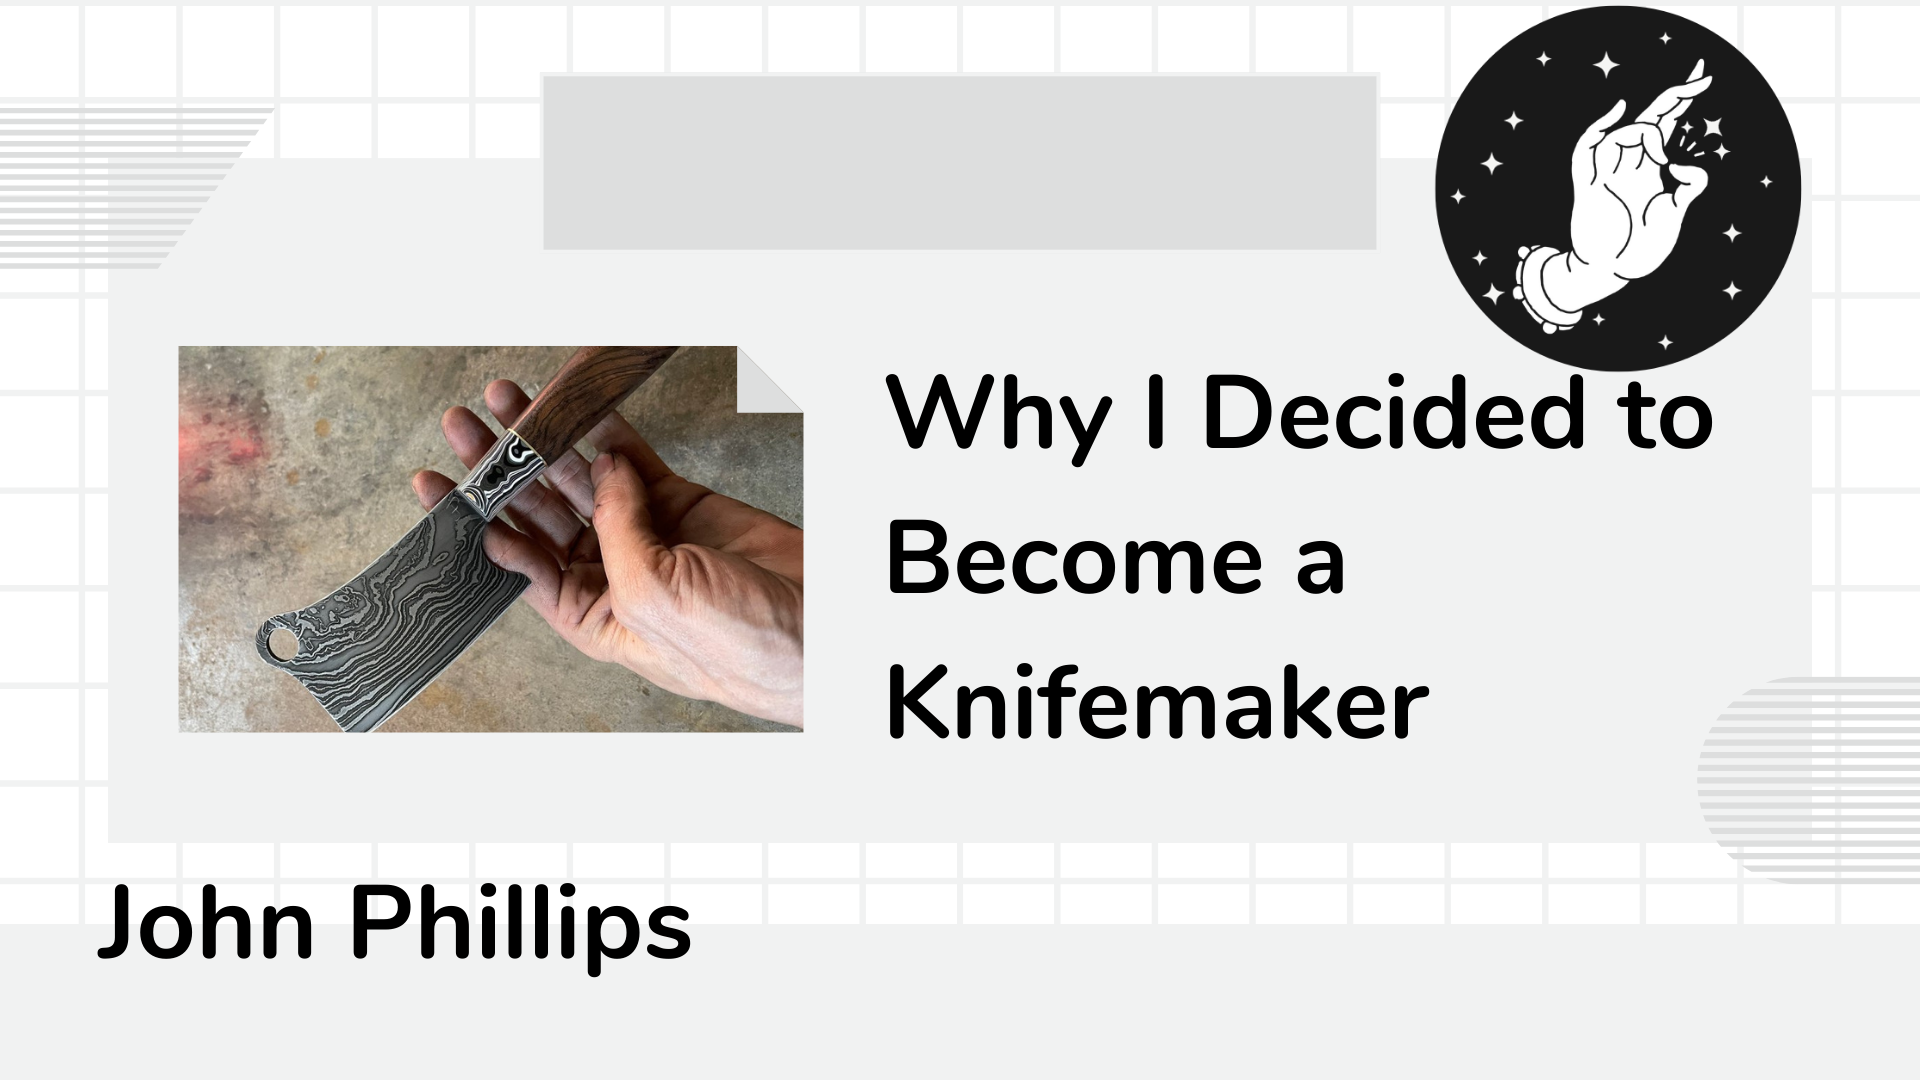 Why I Decided to Become a Knifemaker